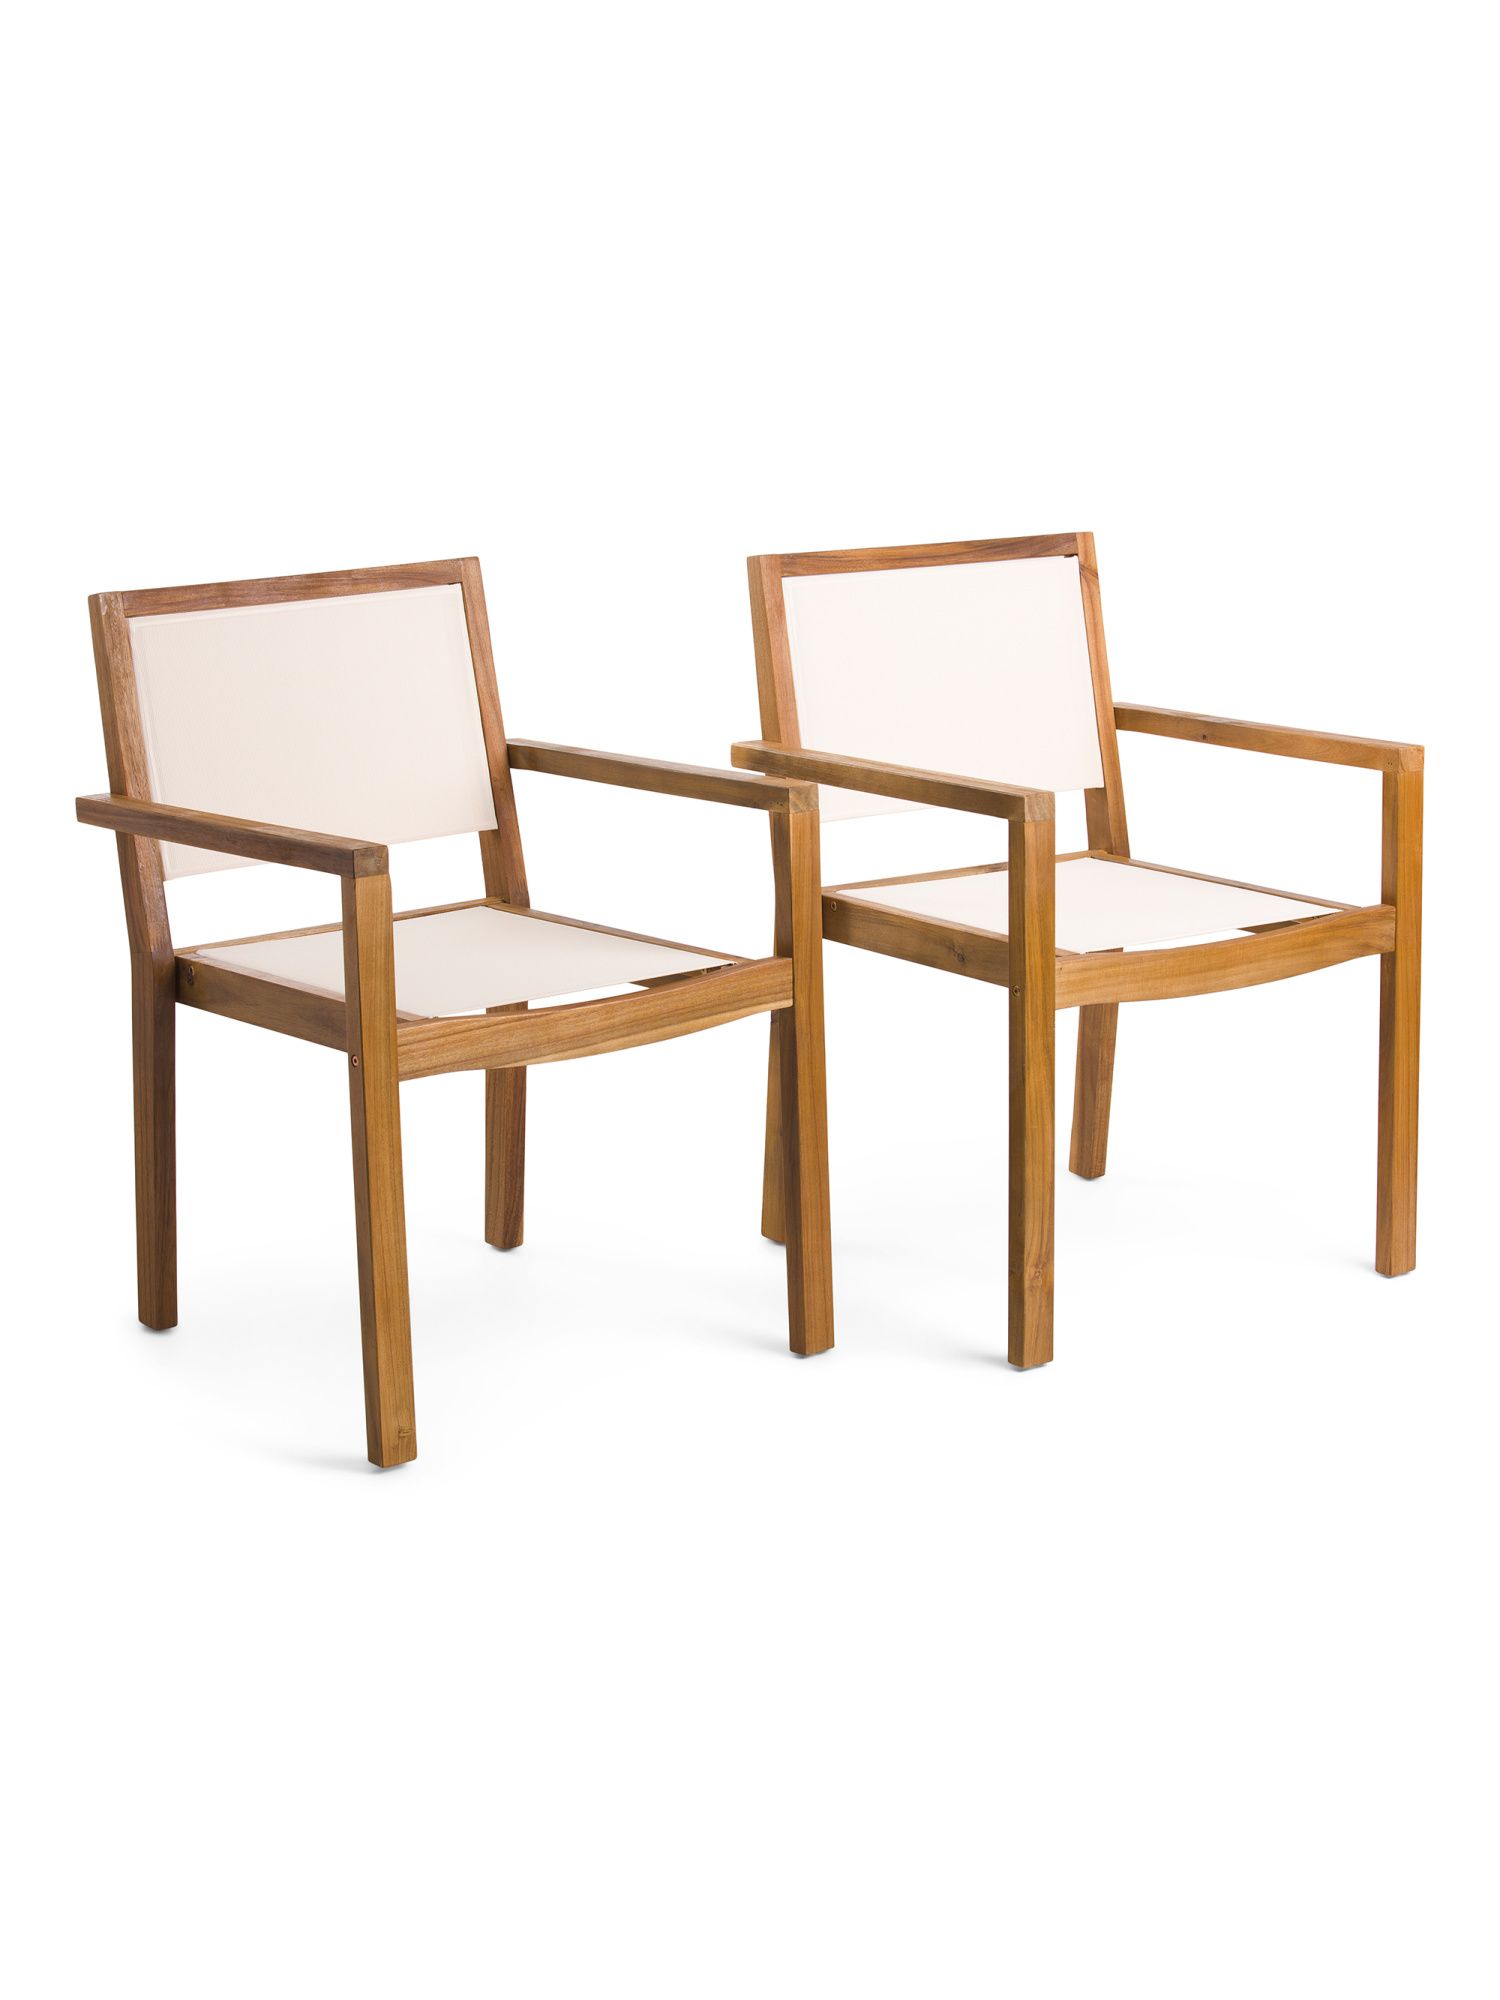 Set Of 2 Outdoor Acacia Wood Stacking Dining Chairs | TJ Maxx